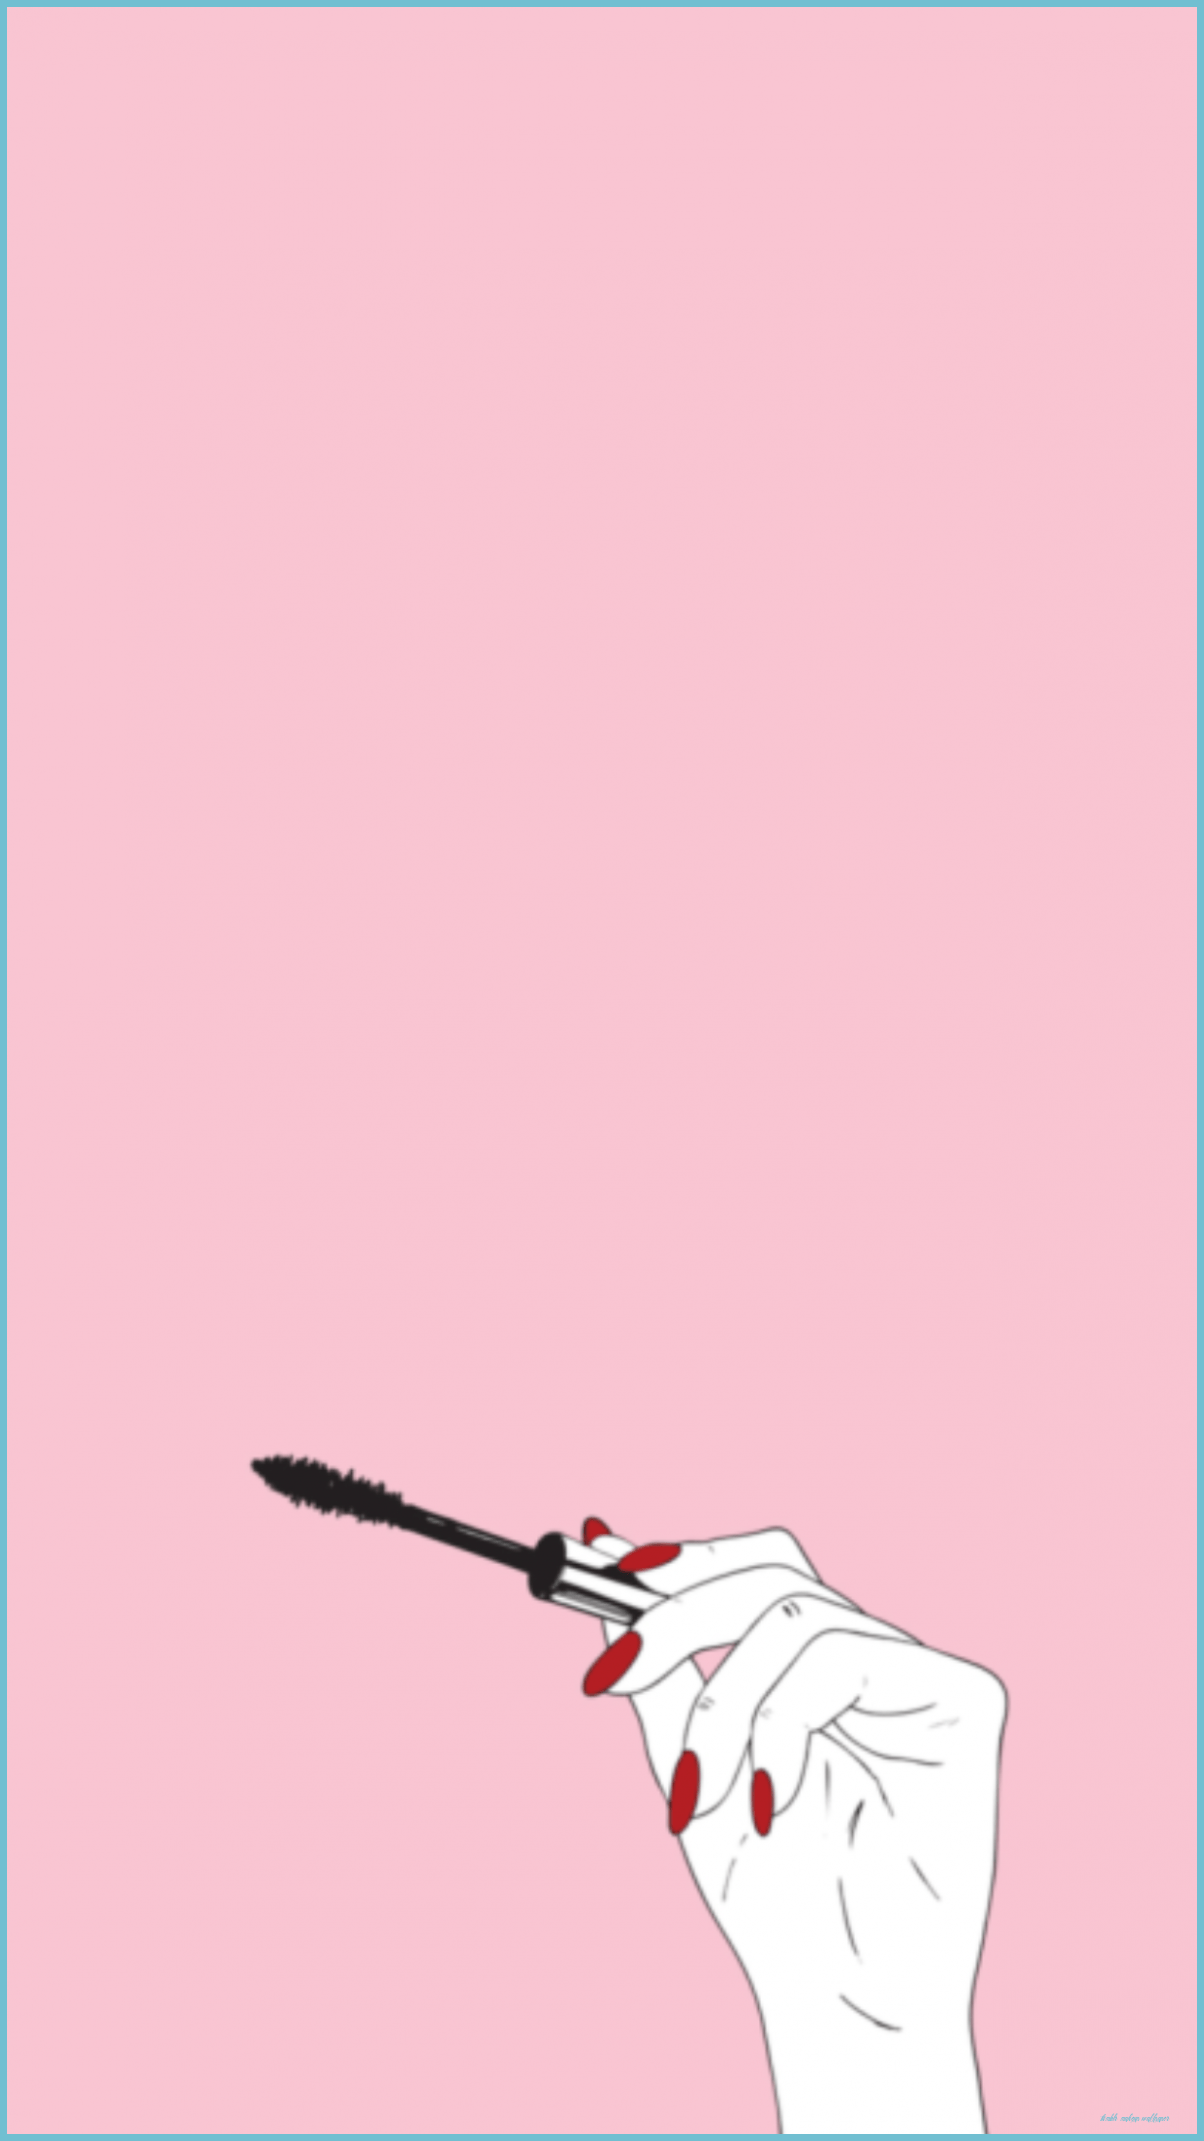 A hand holding a black mascara wand against a pink background - Makeup